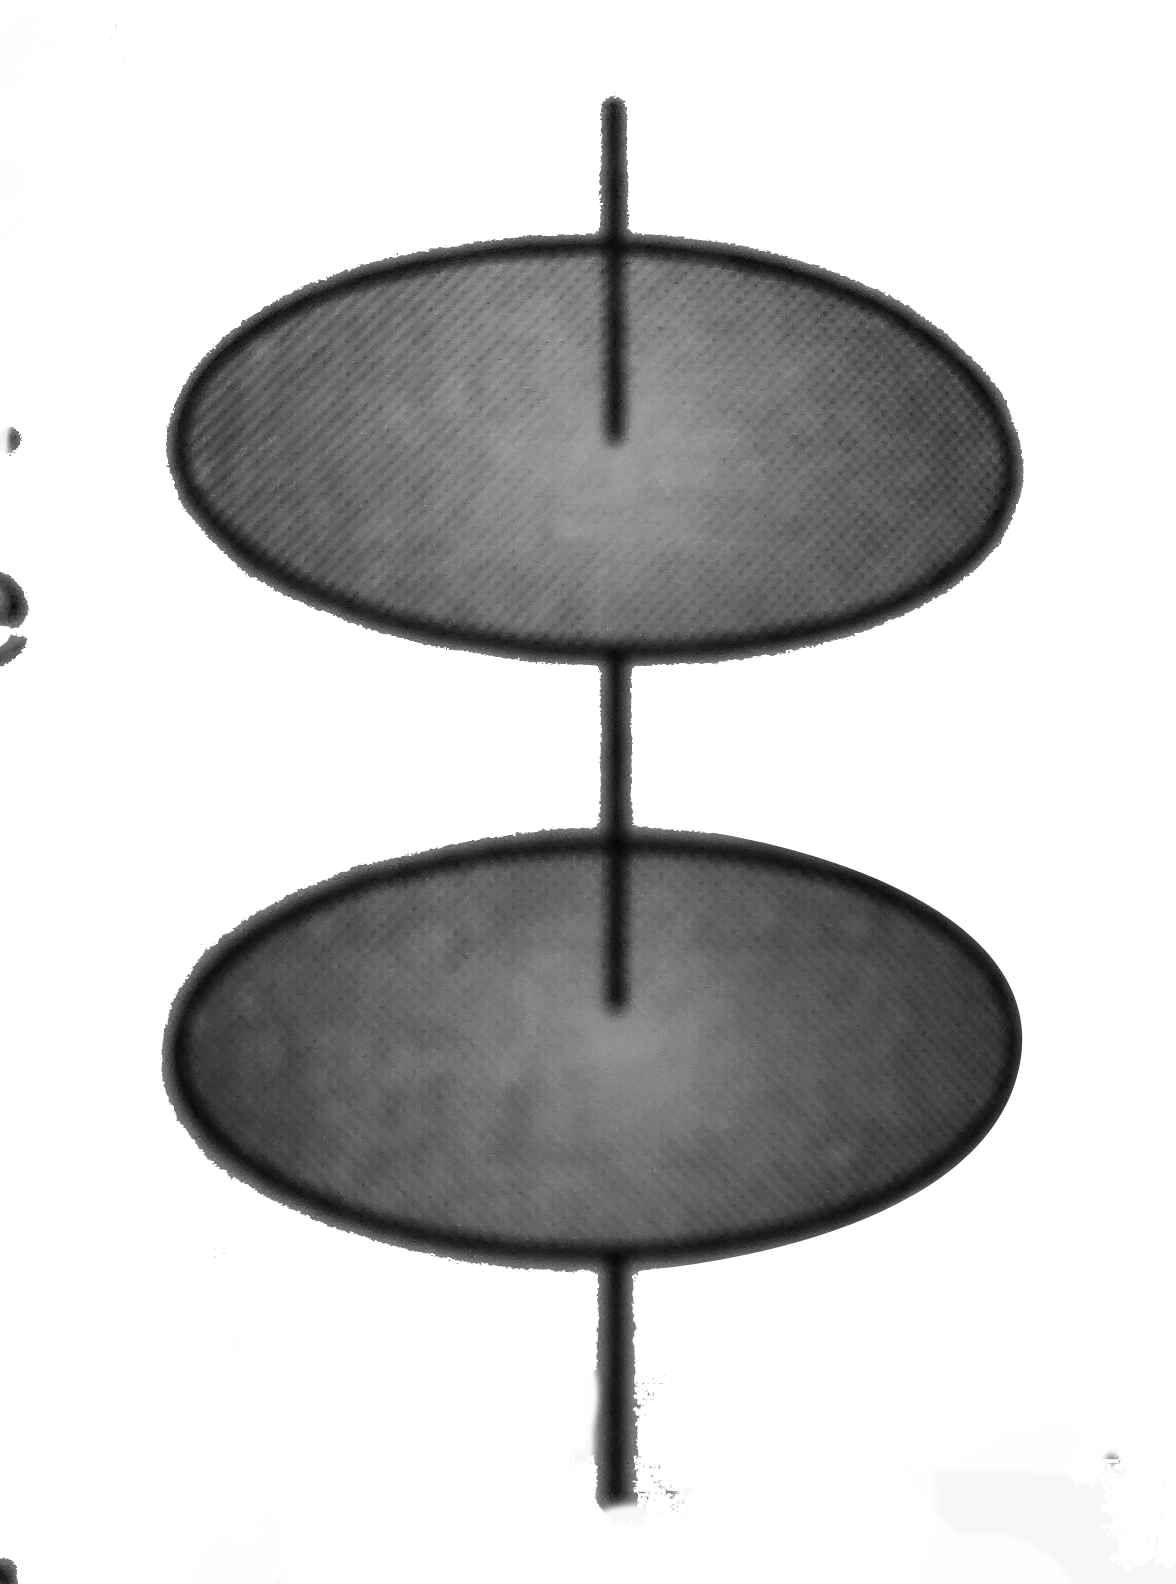 Two identical discs are positioned on a vertical axis as shown in the figure. The bottom disc is rotating at angular velocity omega(0) and has rotational kinetic energy K(0). Change in the rotational kinetic energy of the system is